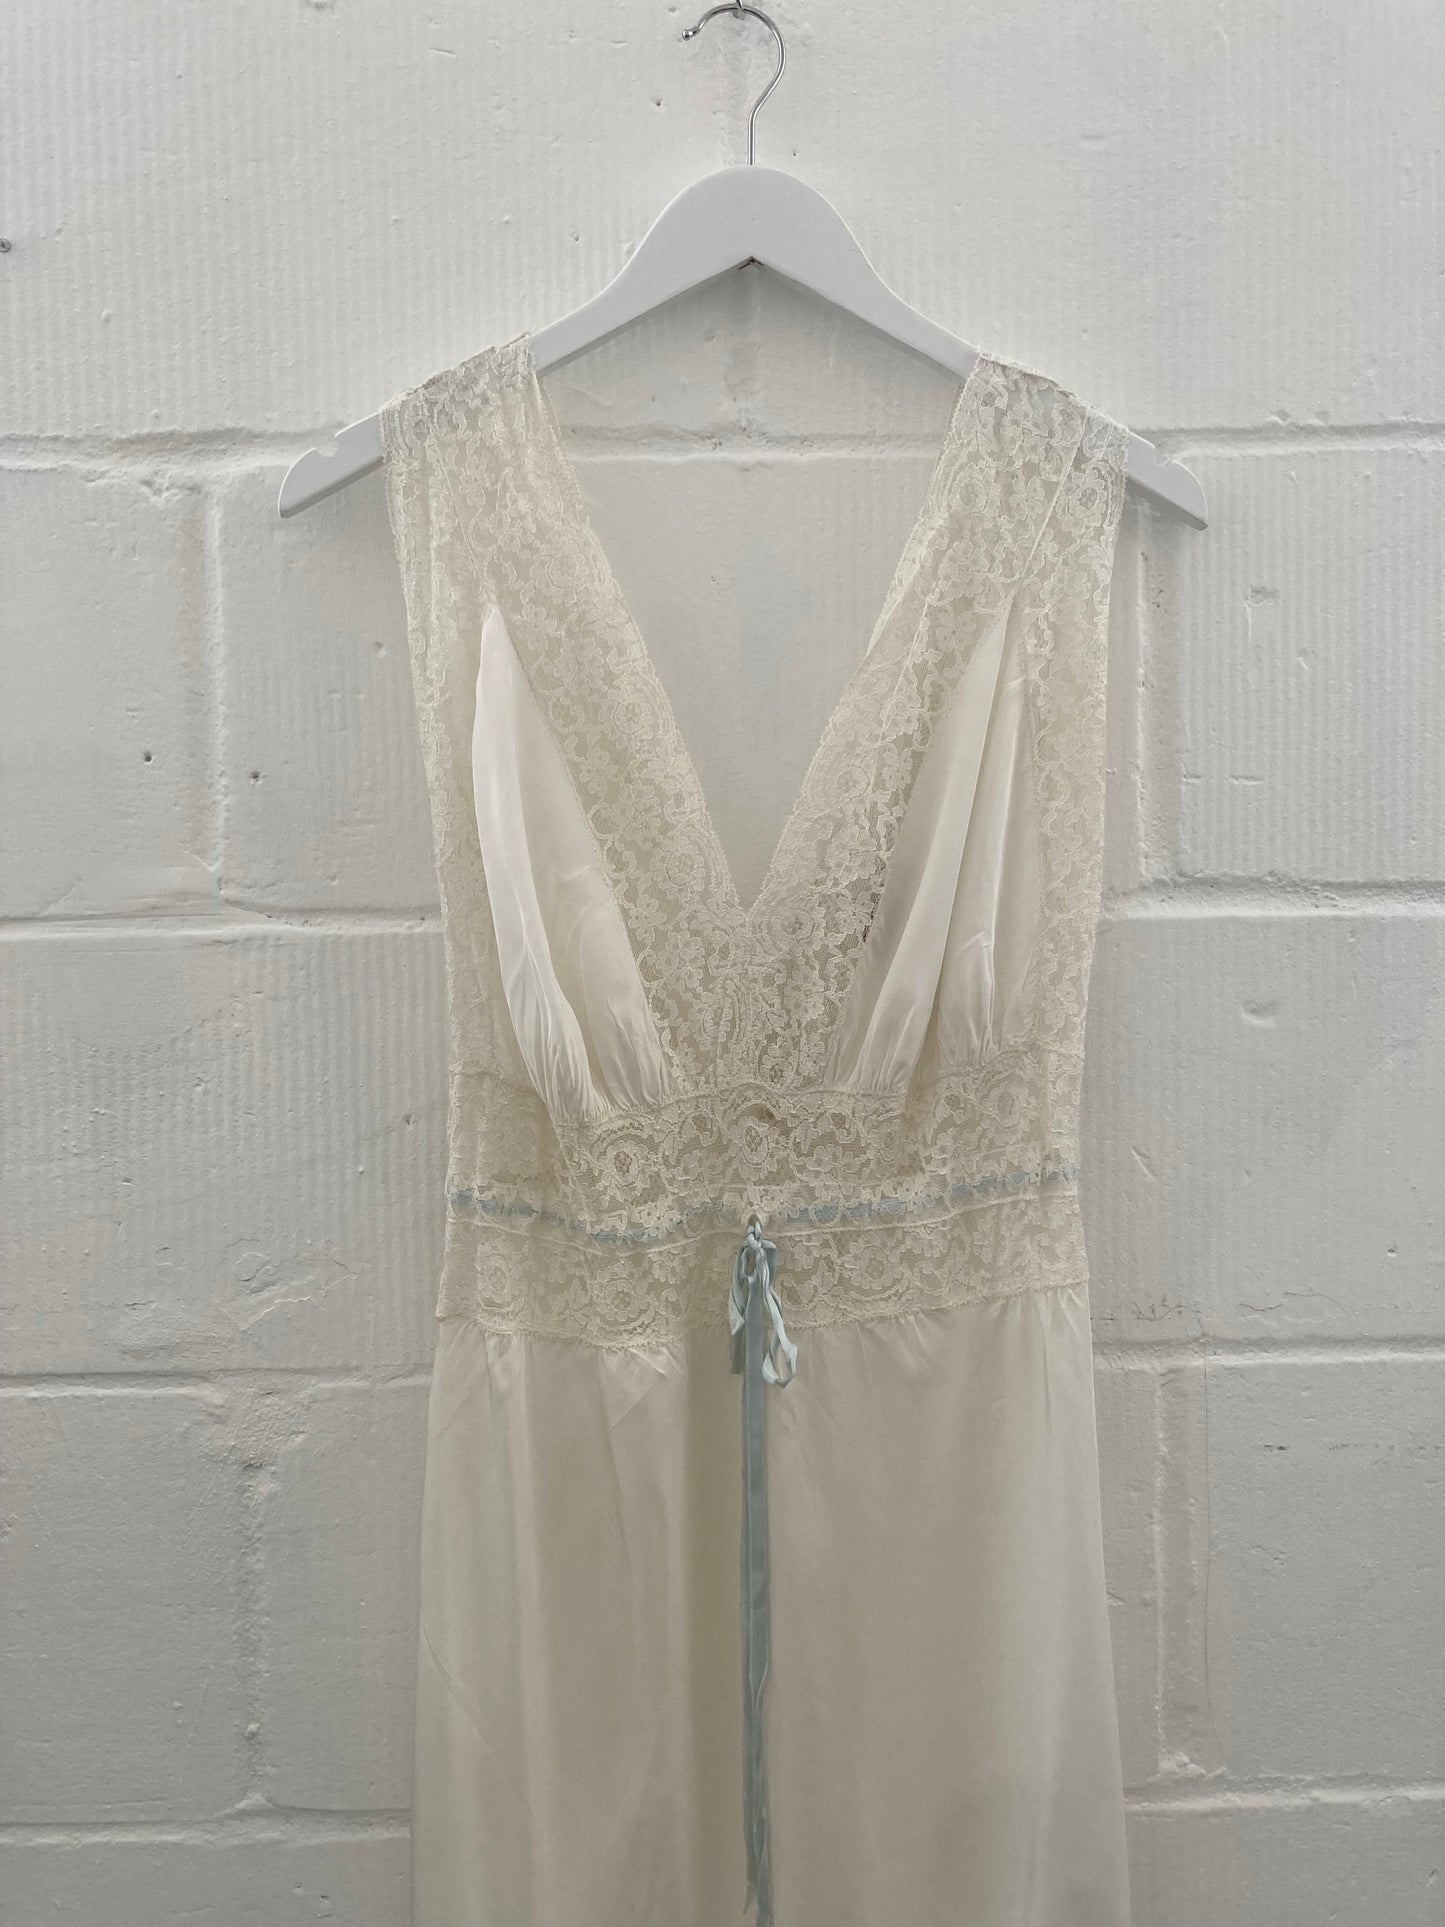 1940s White Slip Gown with Floral Trim & Blue Ribbon M/L